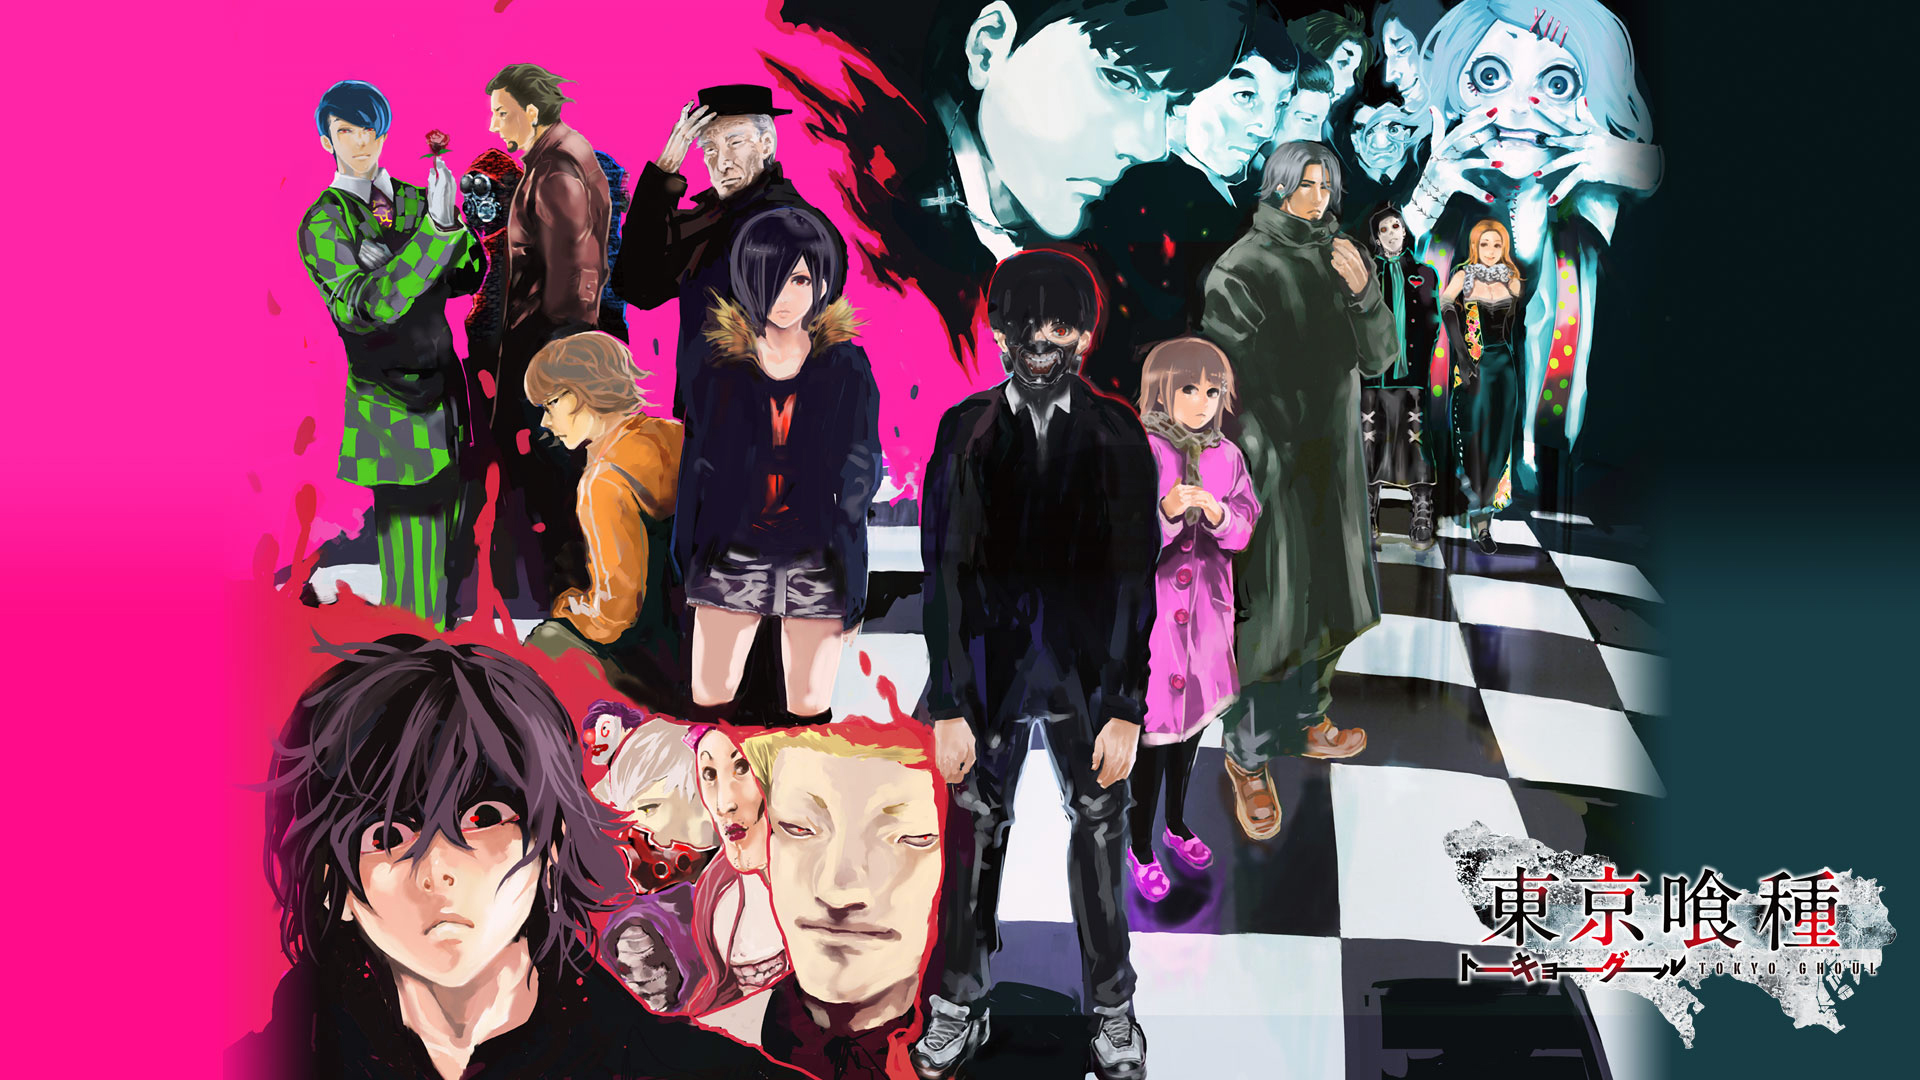 tokyo ghoul characters anime hd 1920x1080 1080p and compatible for 1920x1080